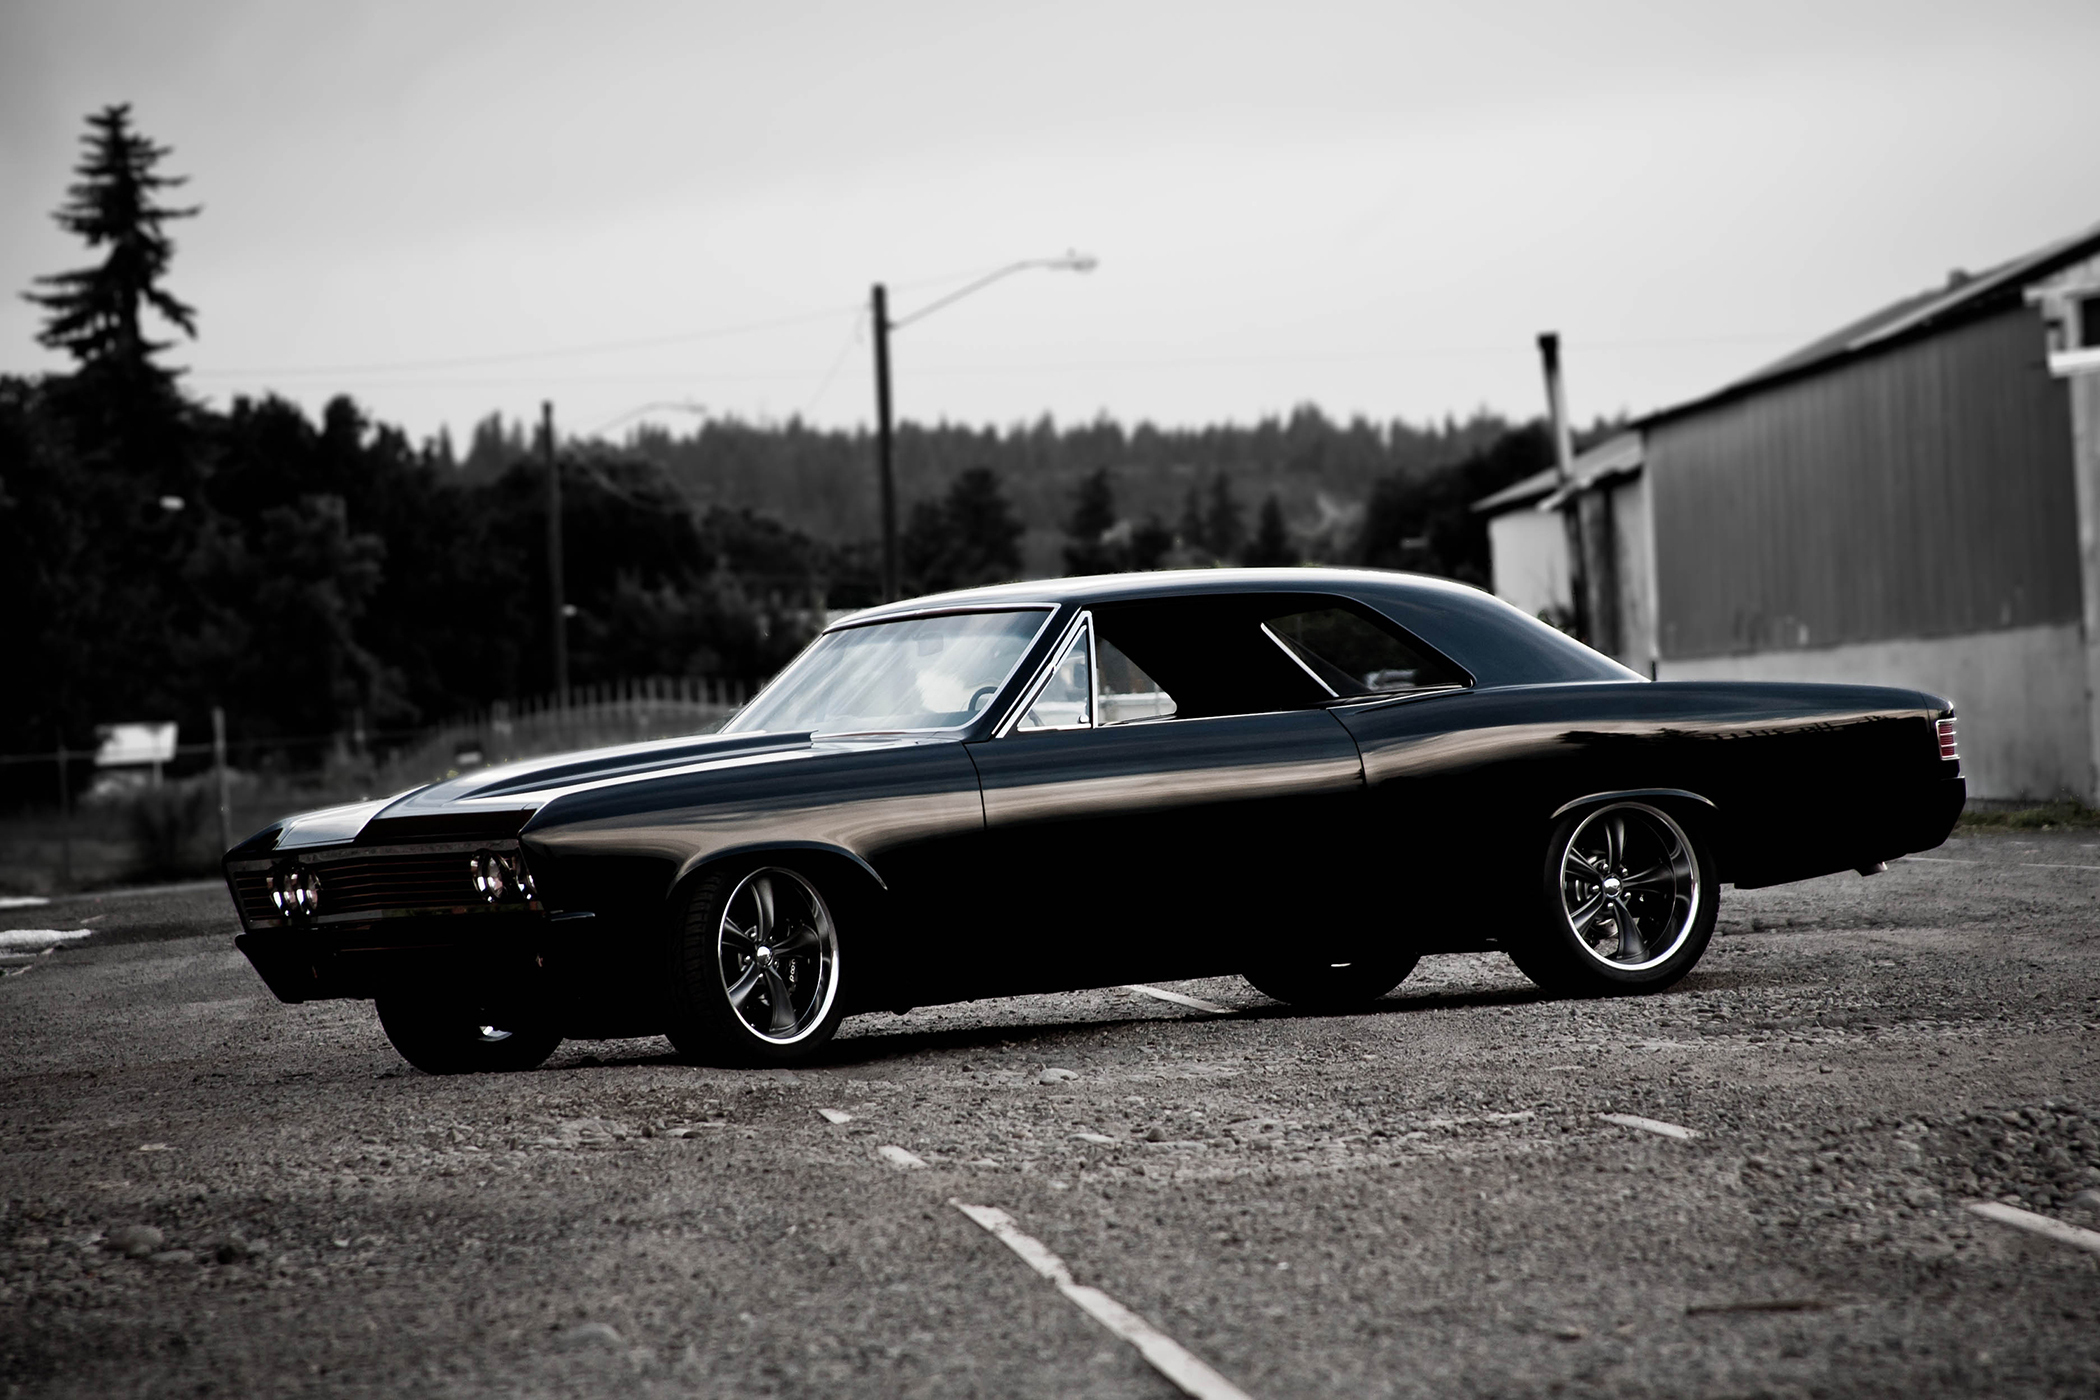 Chevelle SS 1967 chevy hot rod muscle car classic car custom wallpaper